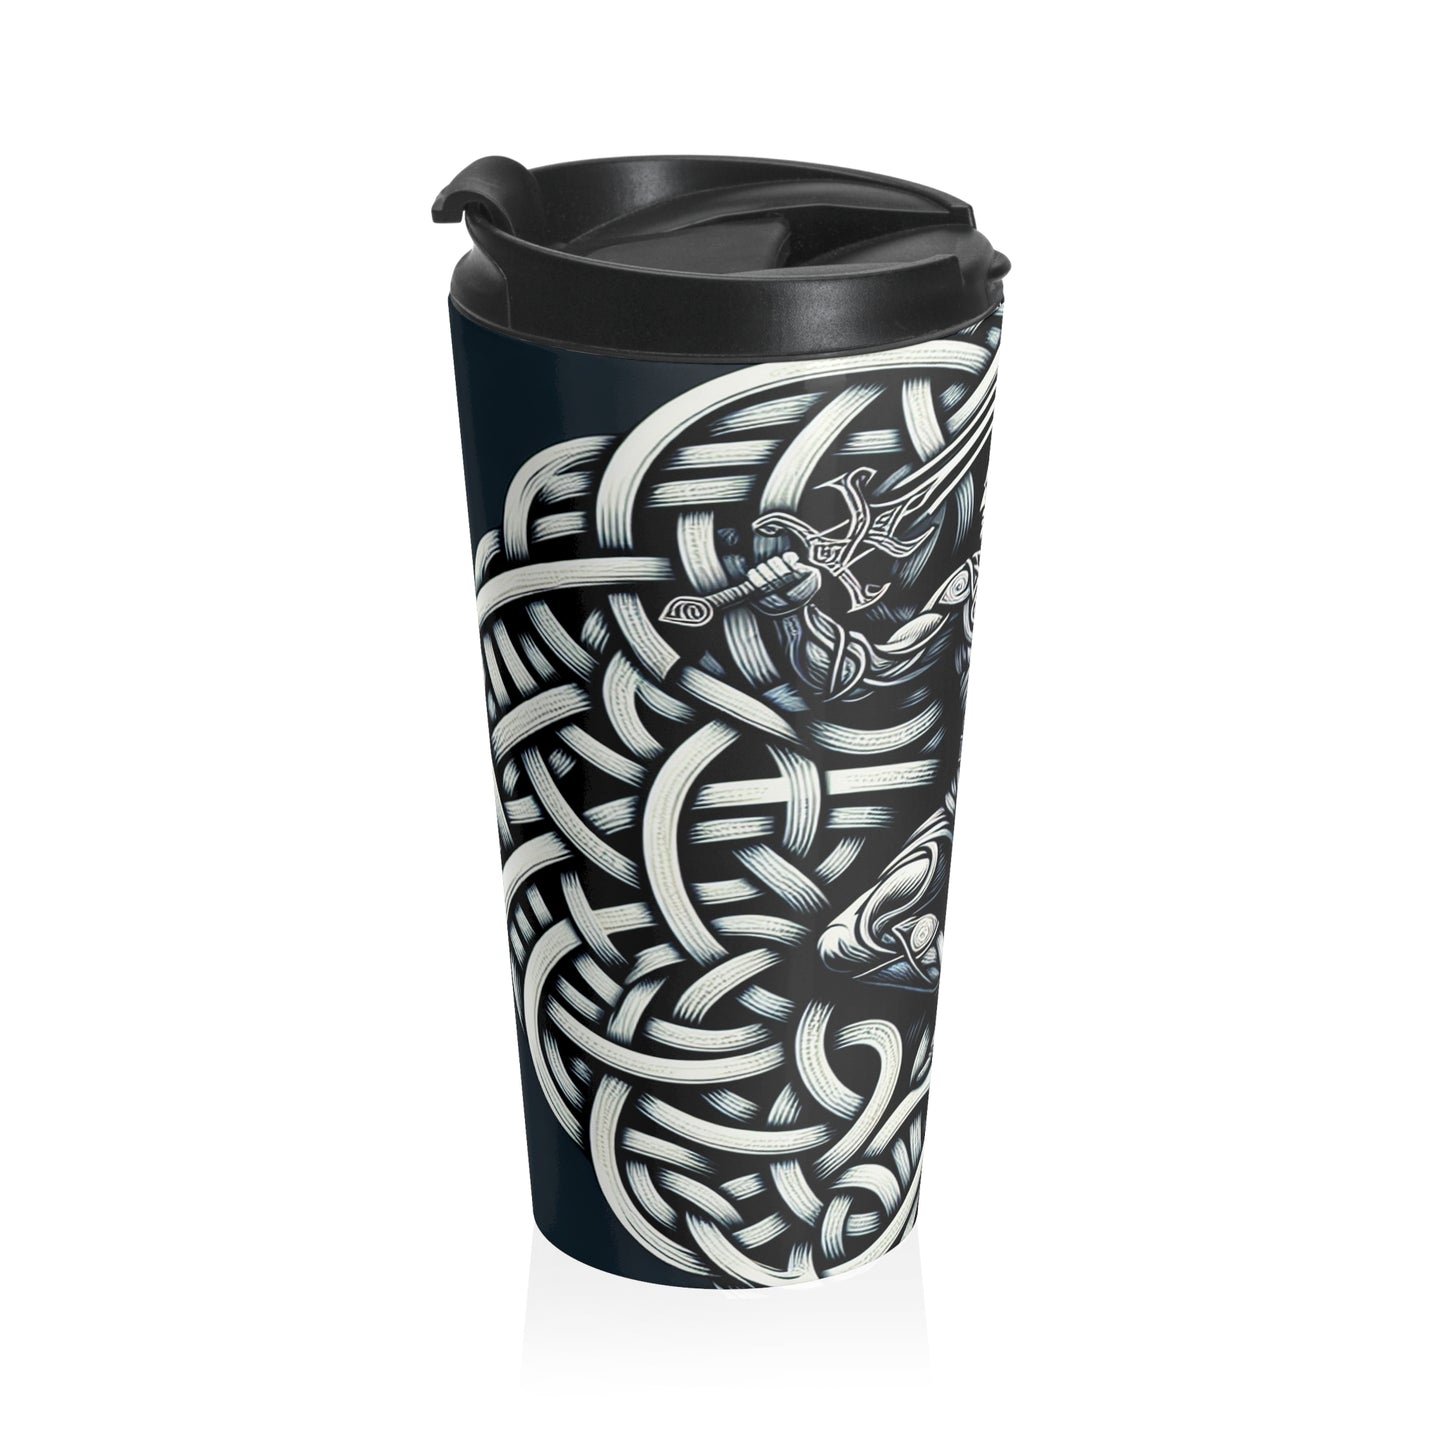 "Celtic Knight: Sword & Shield in Ancient Knots" - The Alien Stainless Steel Travel Mug Celtic Art Style